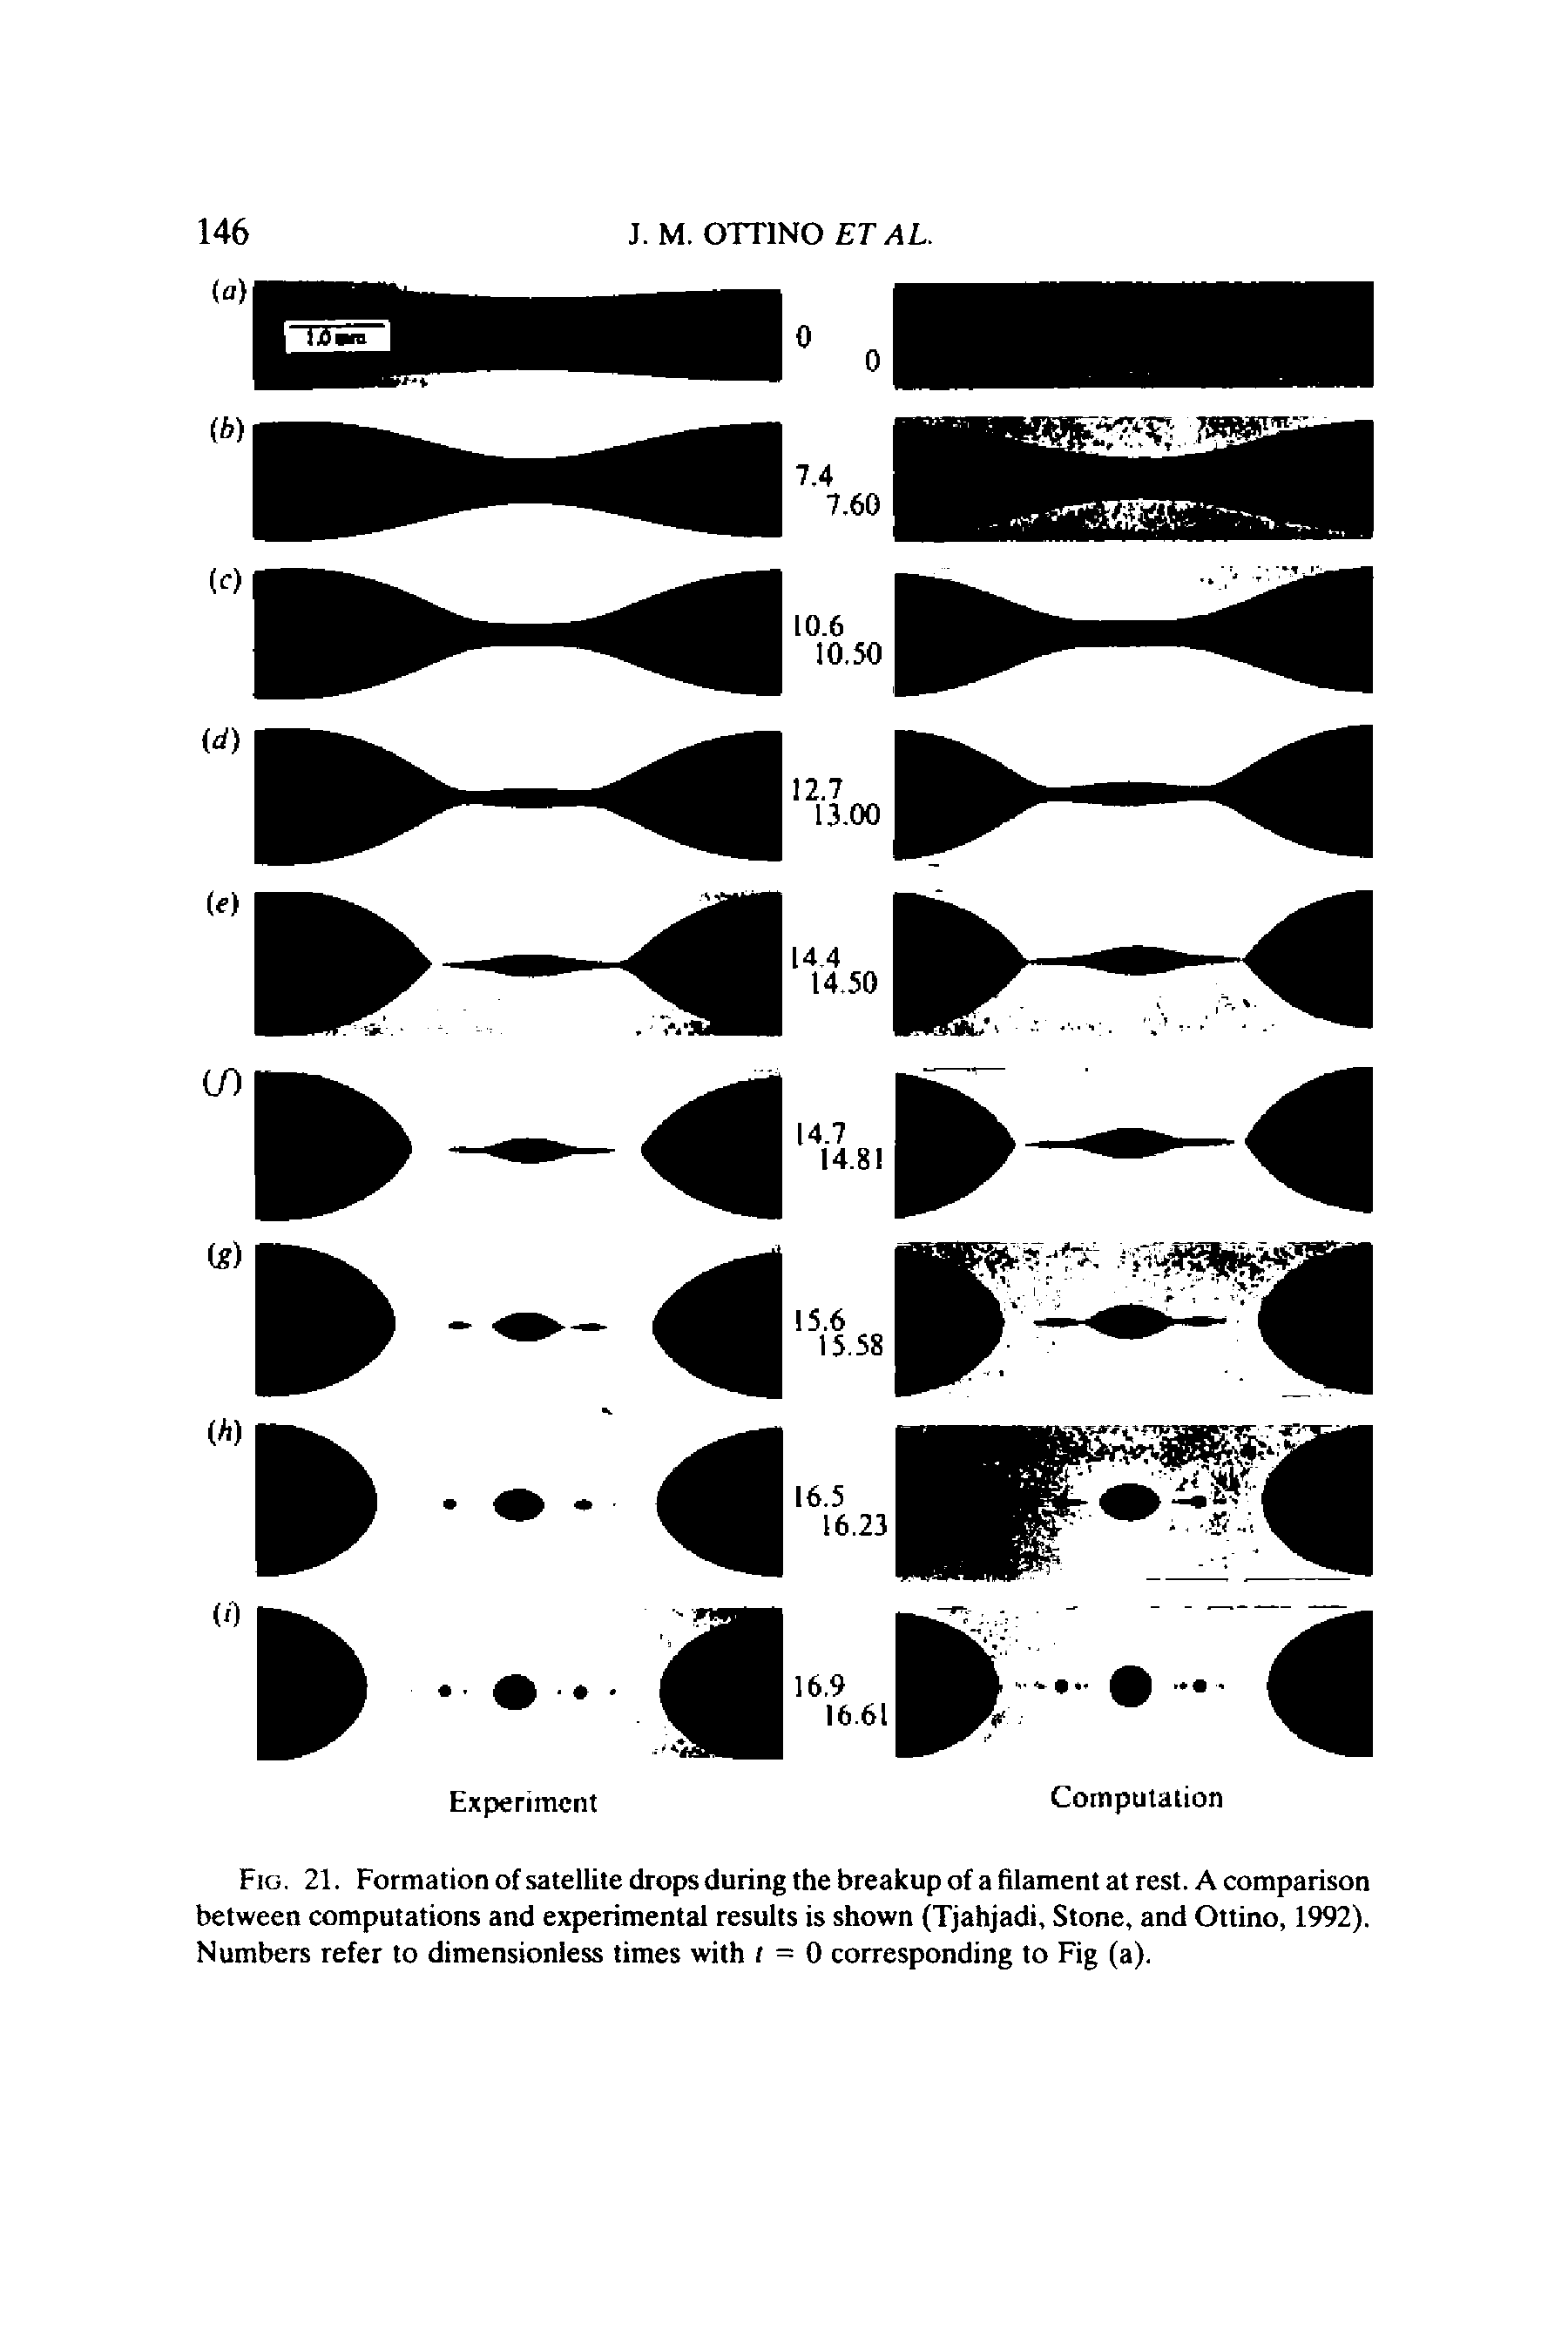 Fig. 21. Formation of satellite drops during the breakup of a filament at rest. A comparison between computations and experimental results is shown (Tjahjadi, Stone, and Ottino, 1992). Numbers refer to dimensionless times with ( = 0 corresponding to Fig (a).